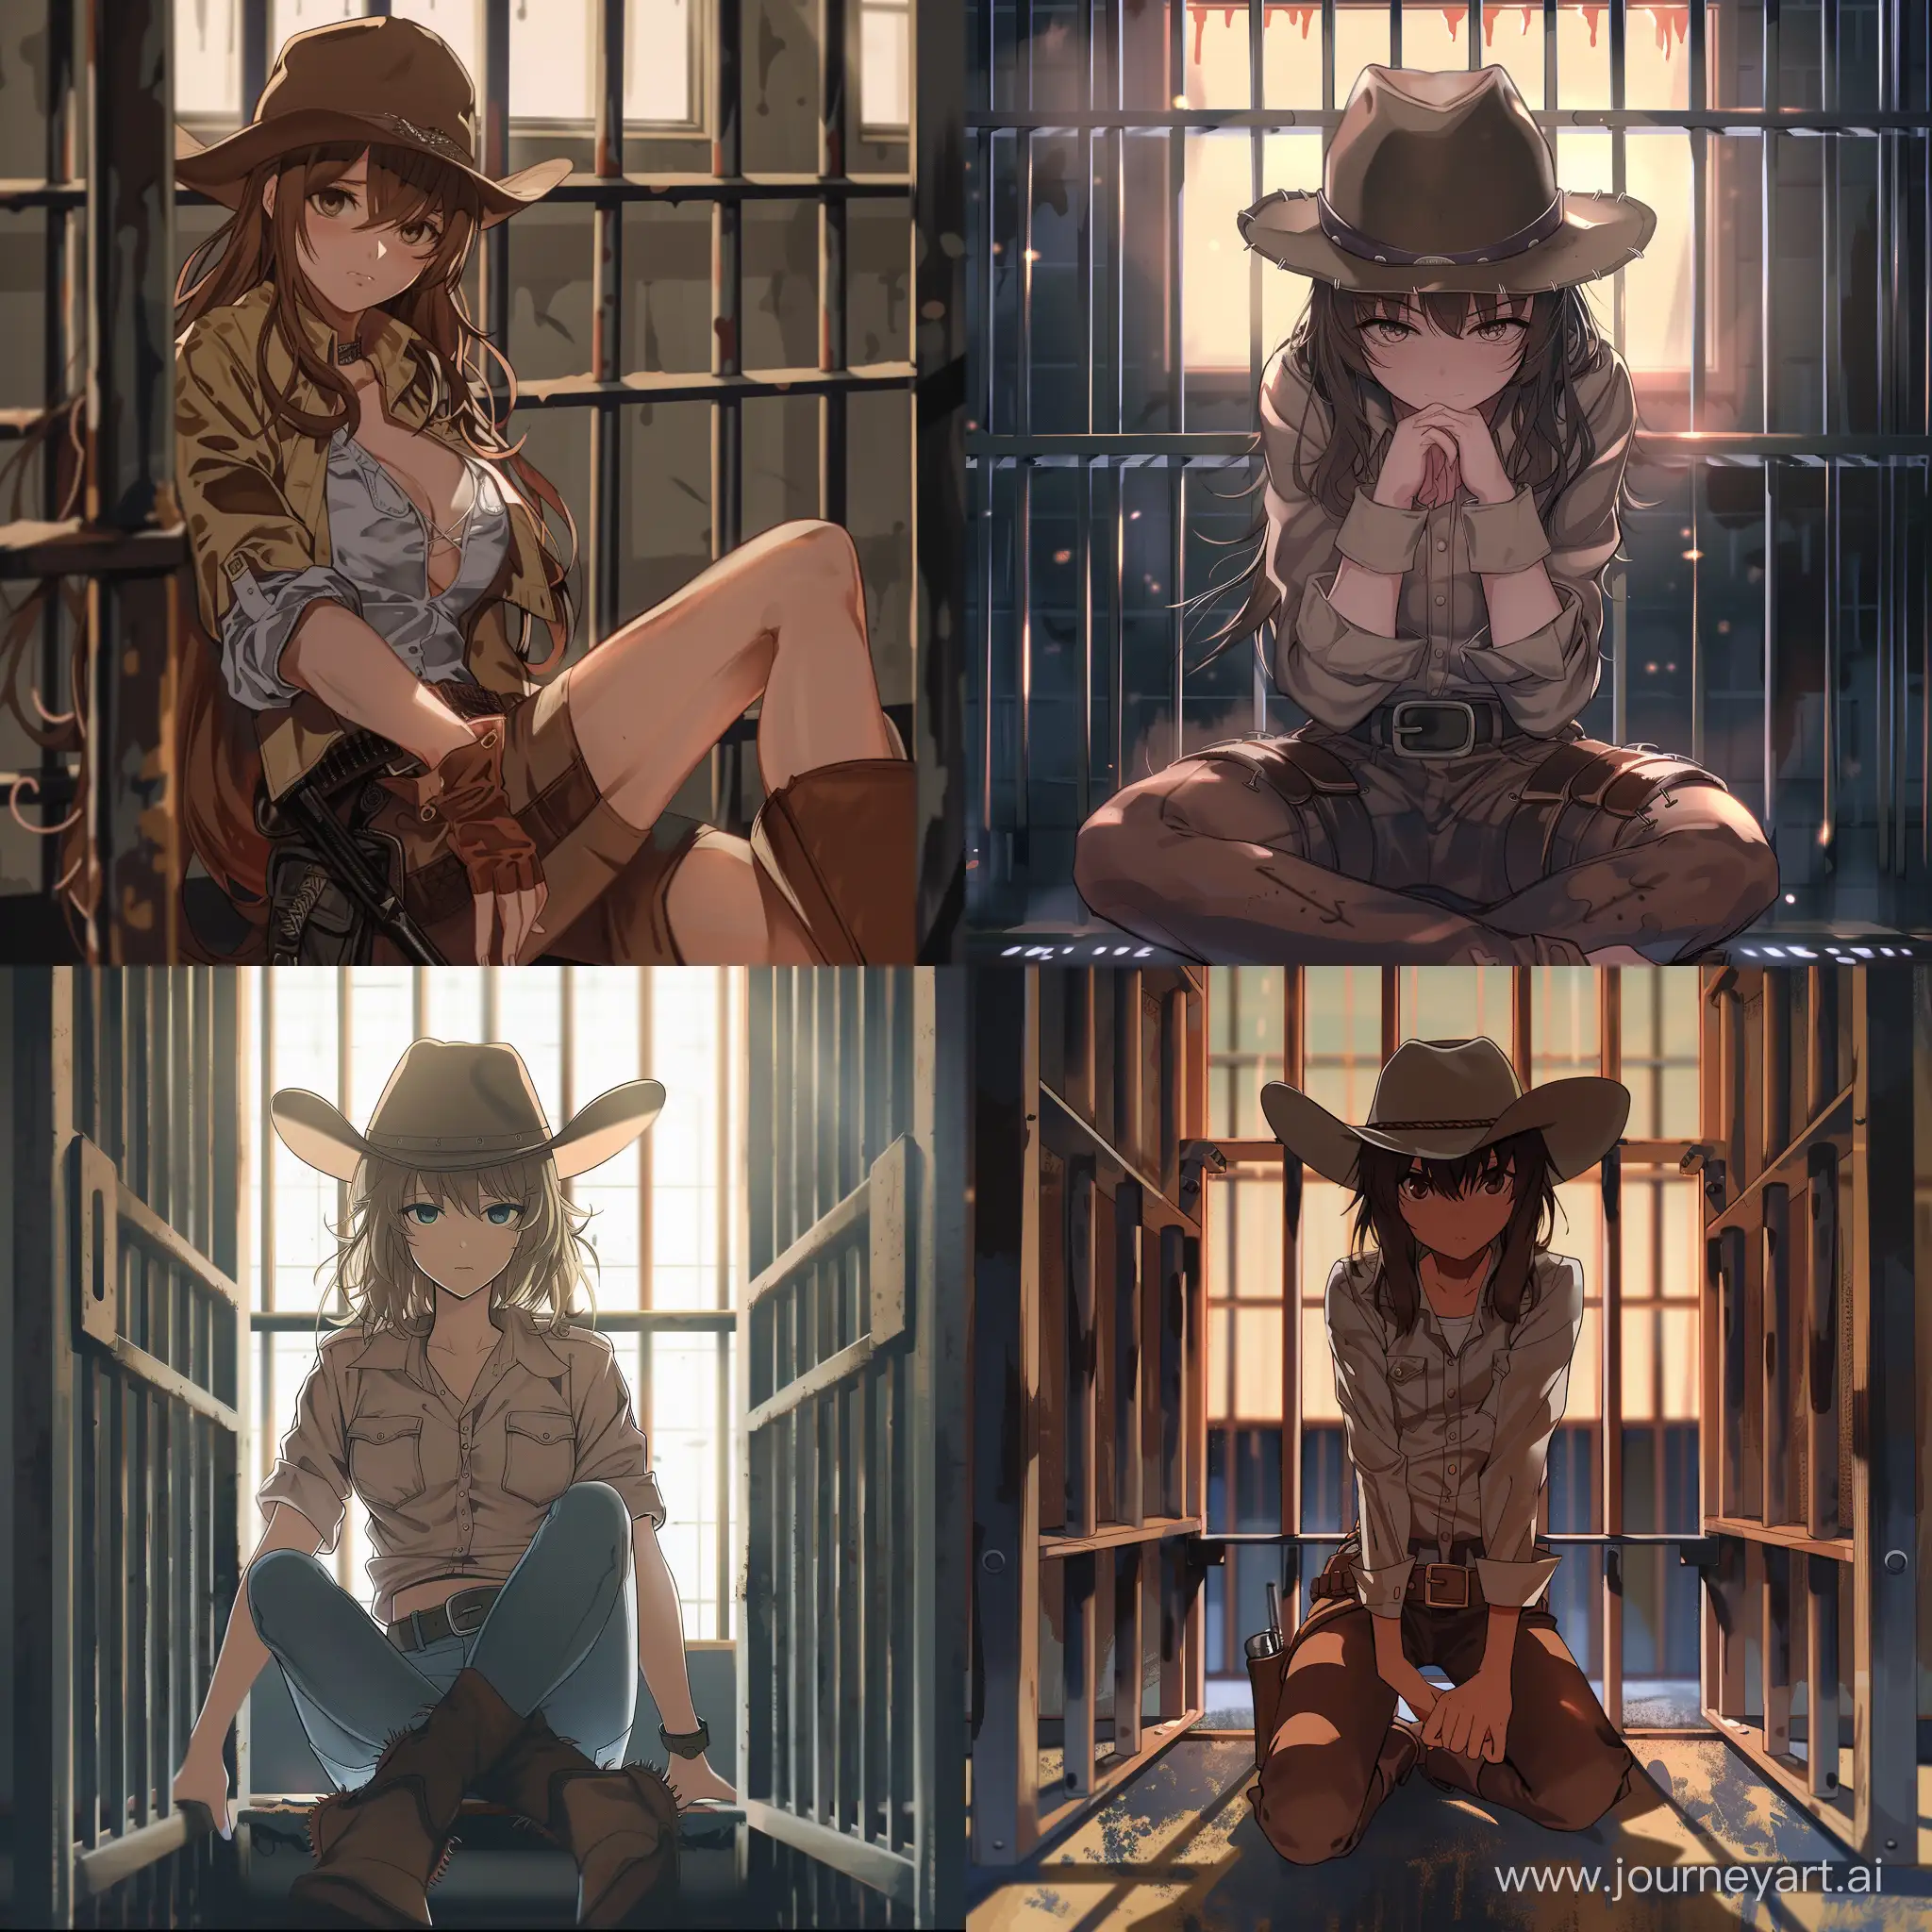 Anime-Style-Cowboy-Girl-Sitting-in-Prison